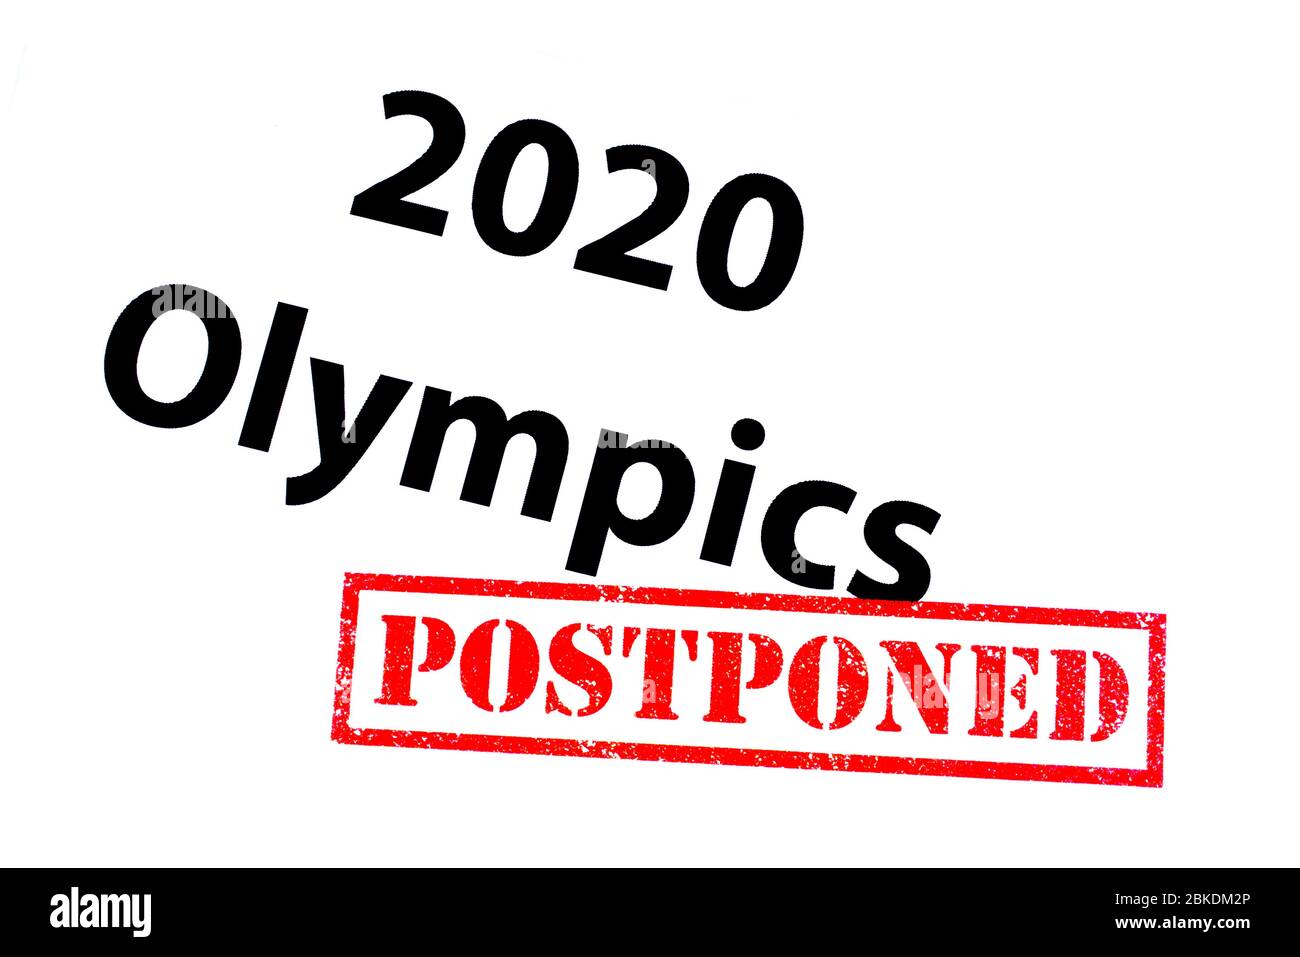 2020 Olympics heading with a red POSTPONED rubber stamp. Stock Photo